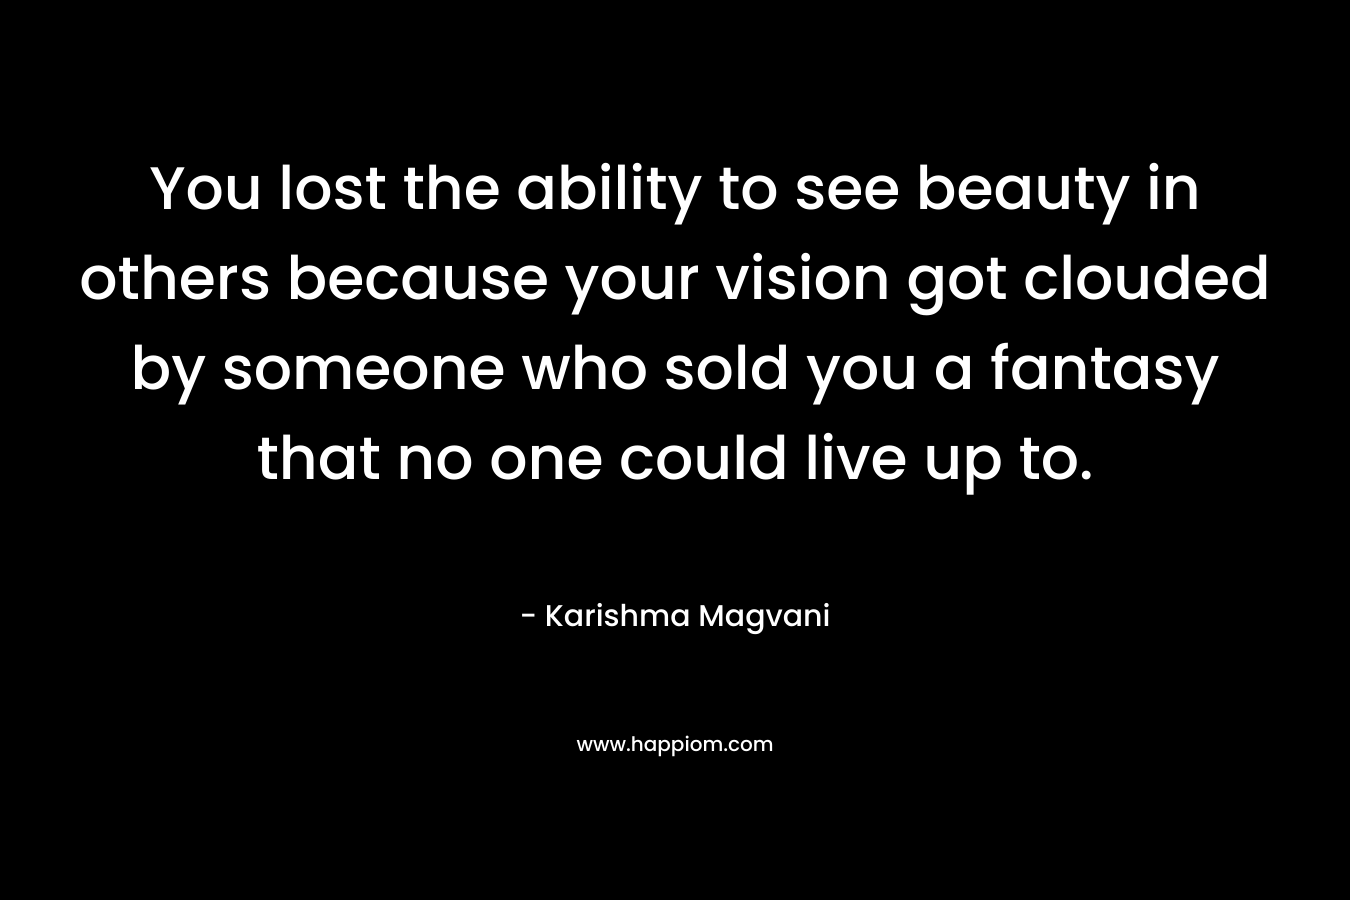 You lost the ability to see beauty in others because your vision got clouded by someone who sold you a fantasy that no one could live up to. – Karishma Magvani